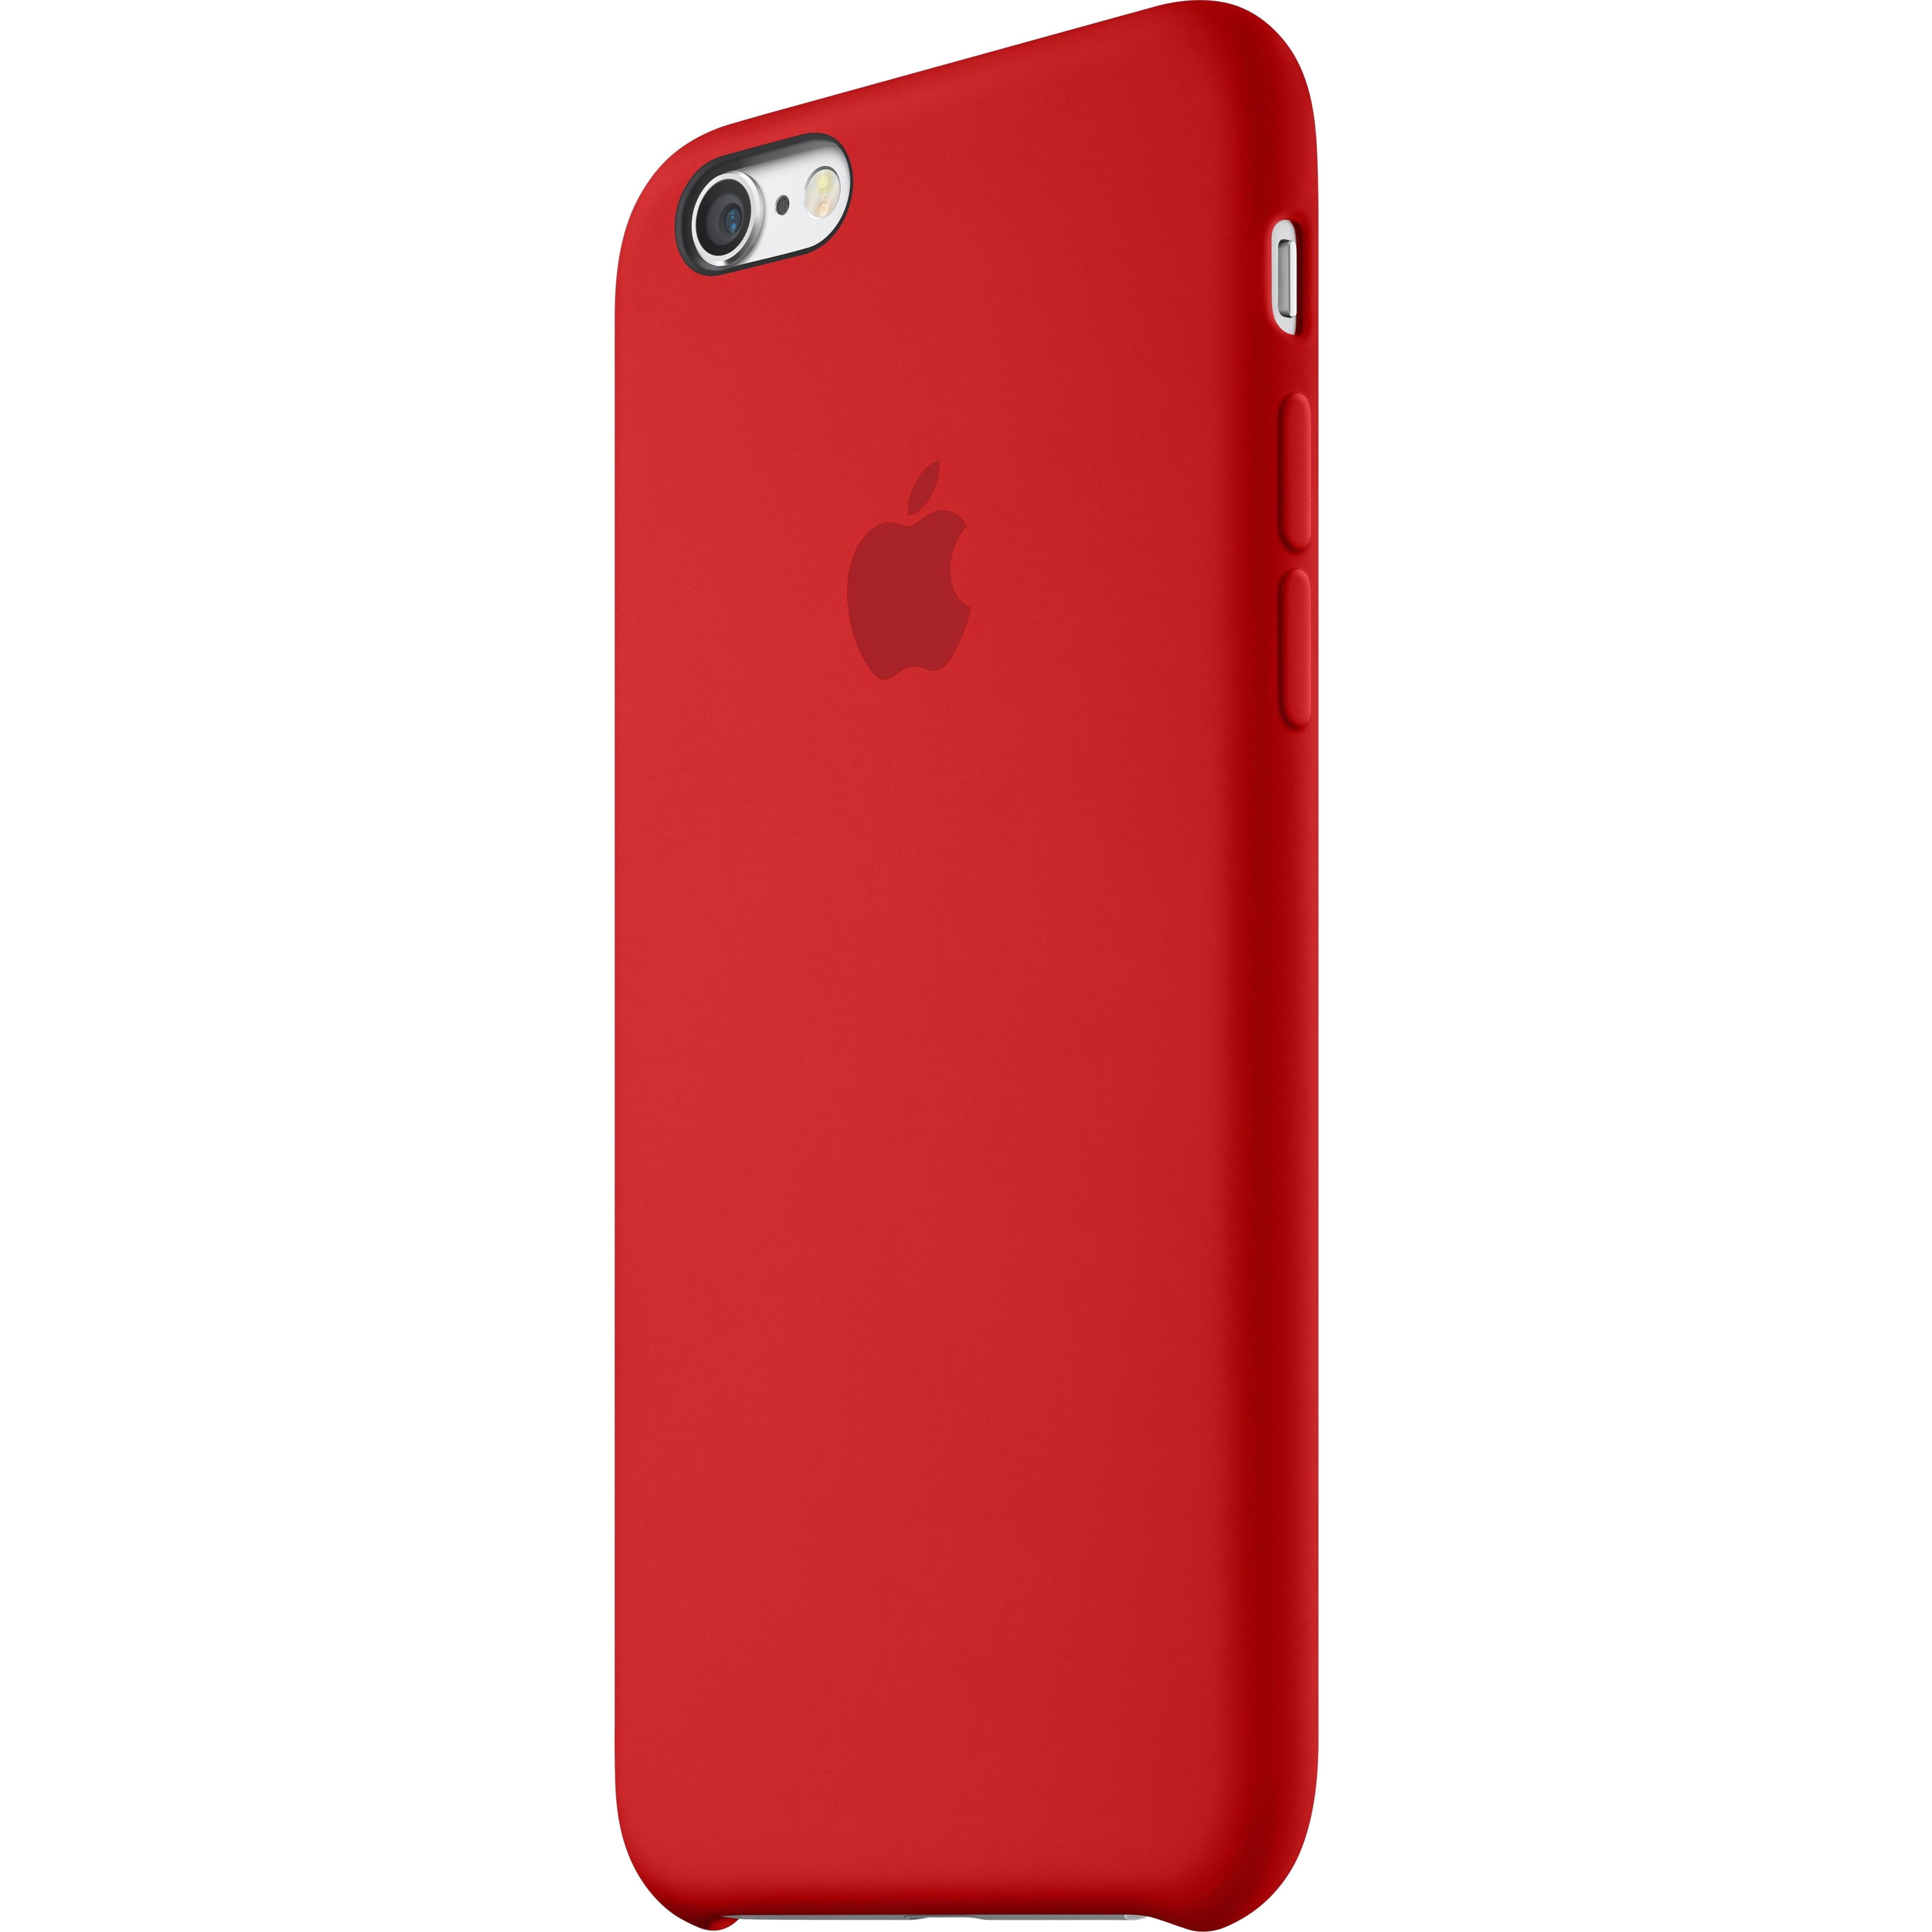 6s Case, (Product)Red - Walmart.com